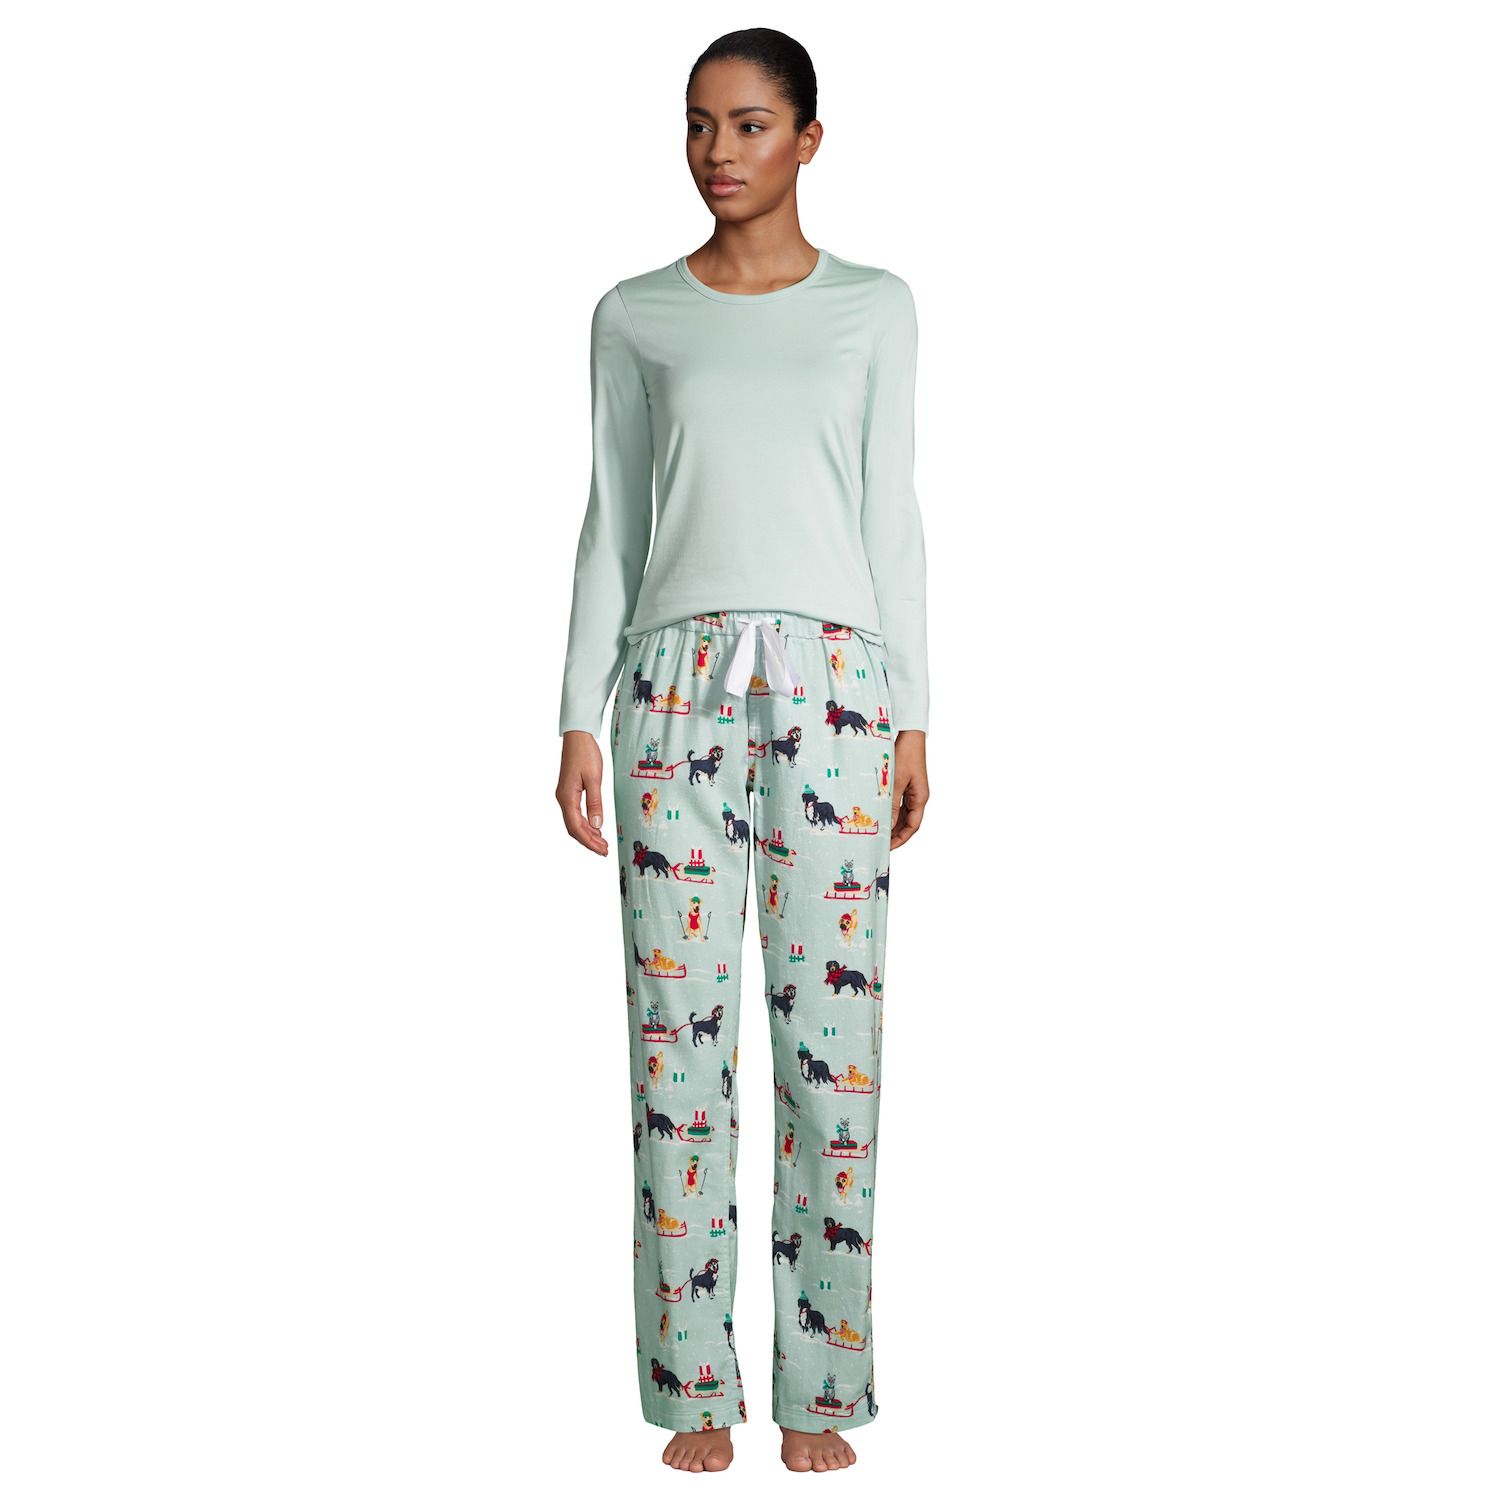 Image for Lands' End Women's Knit Long Sleeve Pajama Top and Pajama Flannel Pants Set at Kohl's.